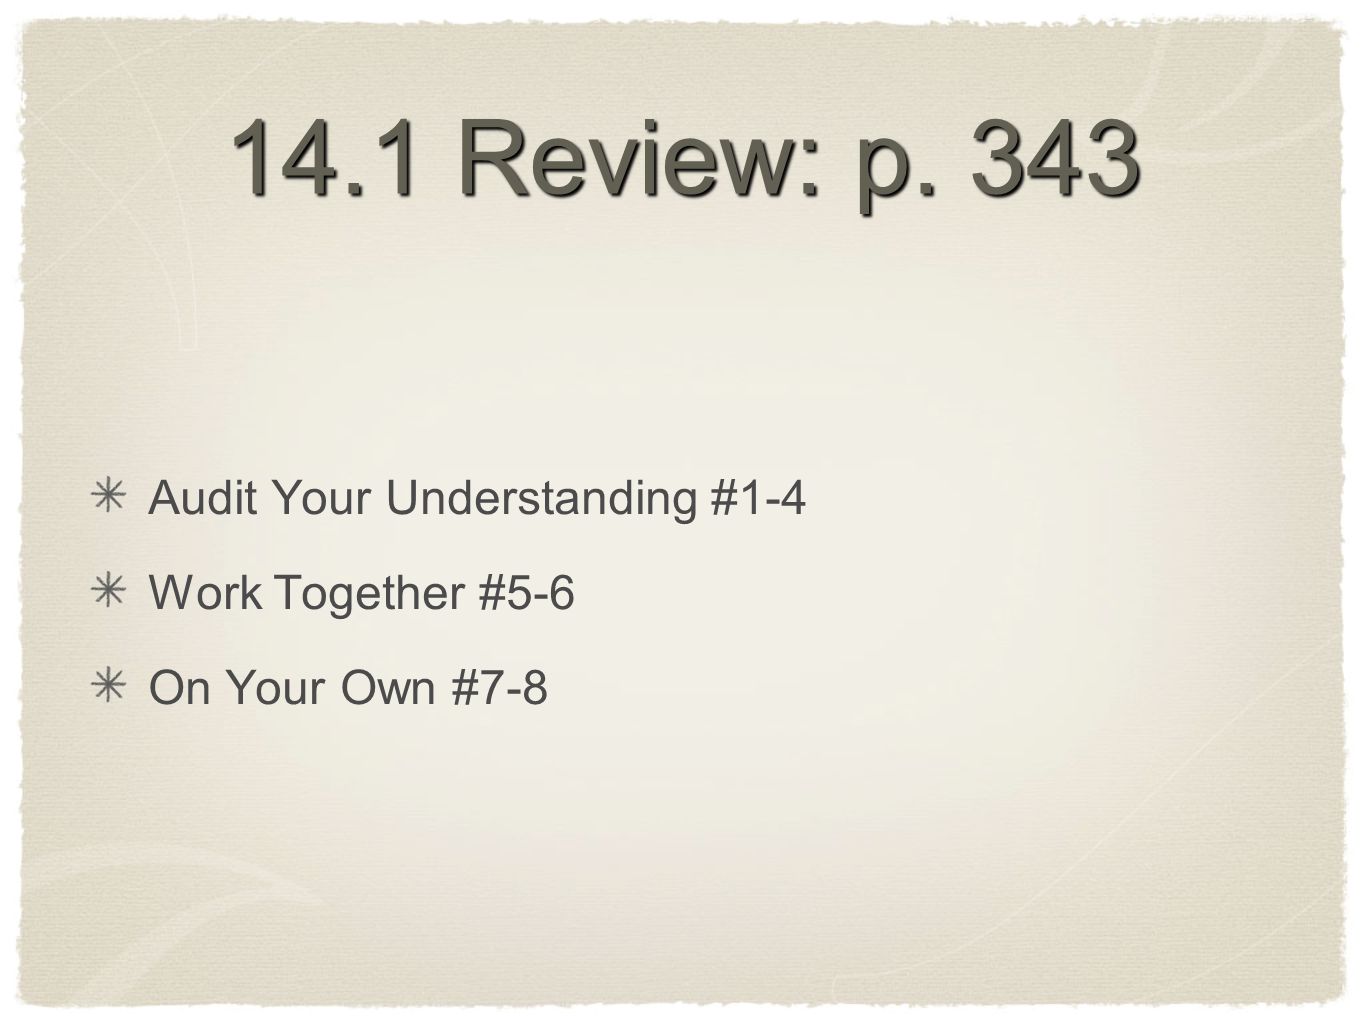 14.1 Review: p. 343 Audit Your Understanding #1-4 Work Together #5-6